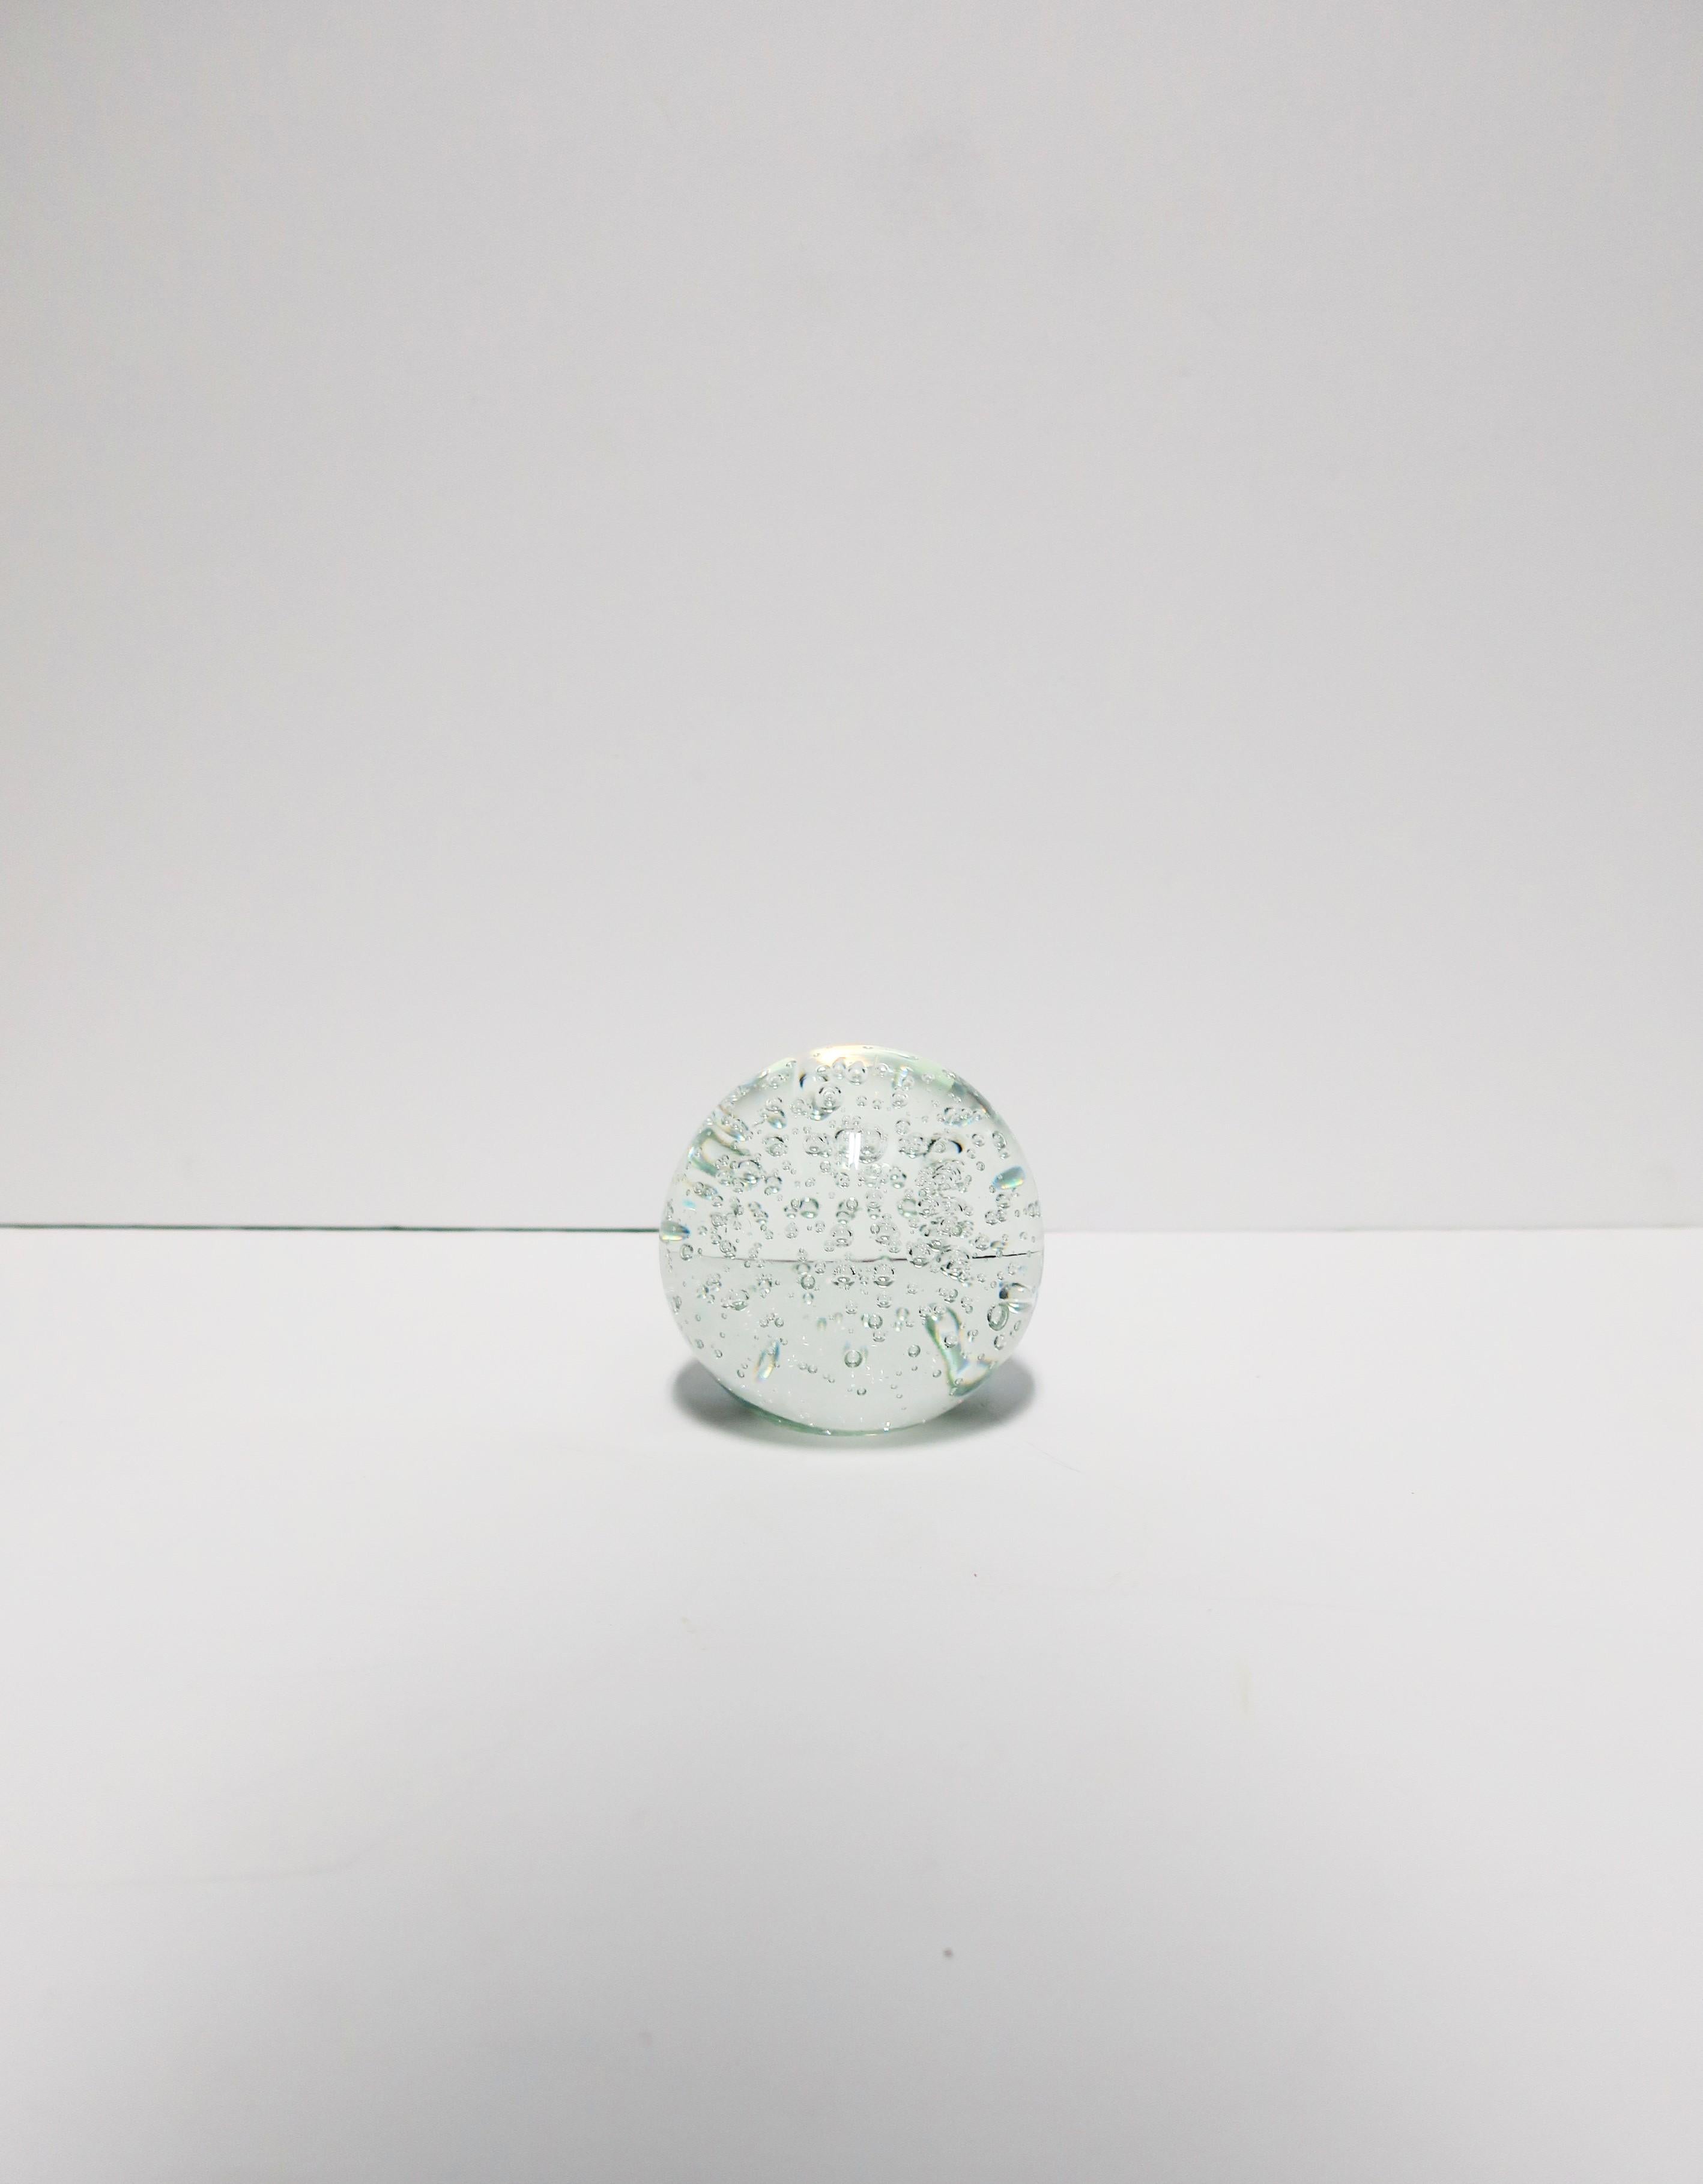 A round crystal decorative ball sphere with bubble design. Piece has flat bottom for stability. 
Dimensions: 3.63